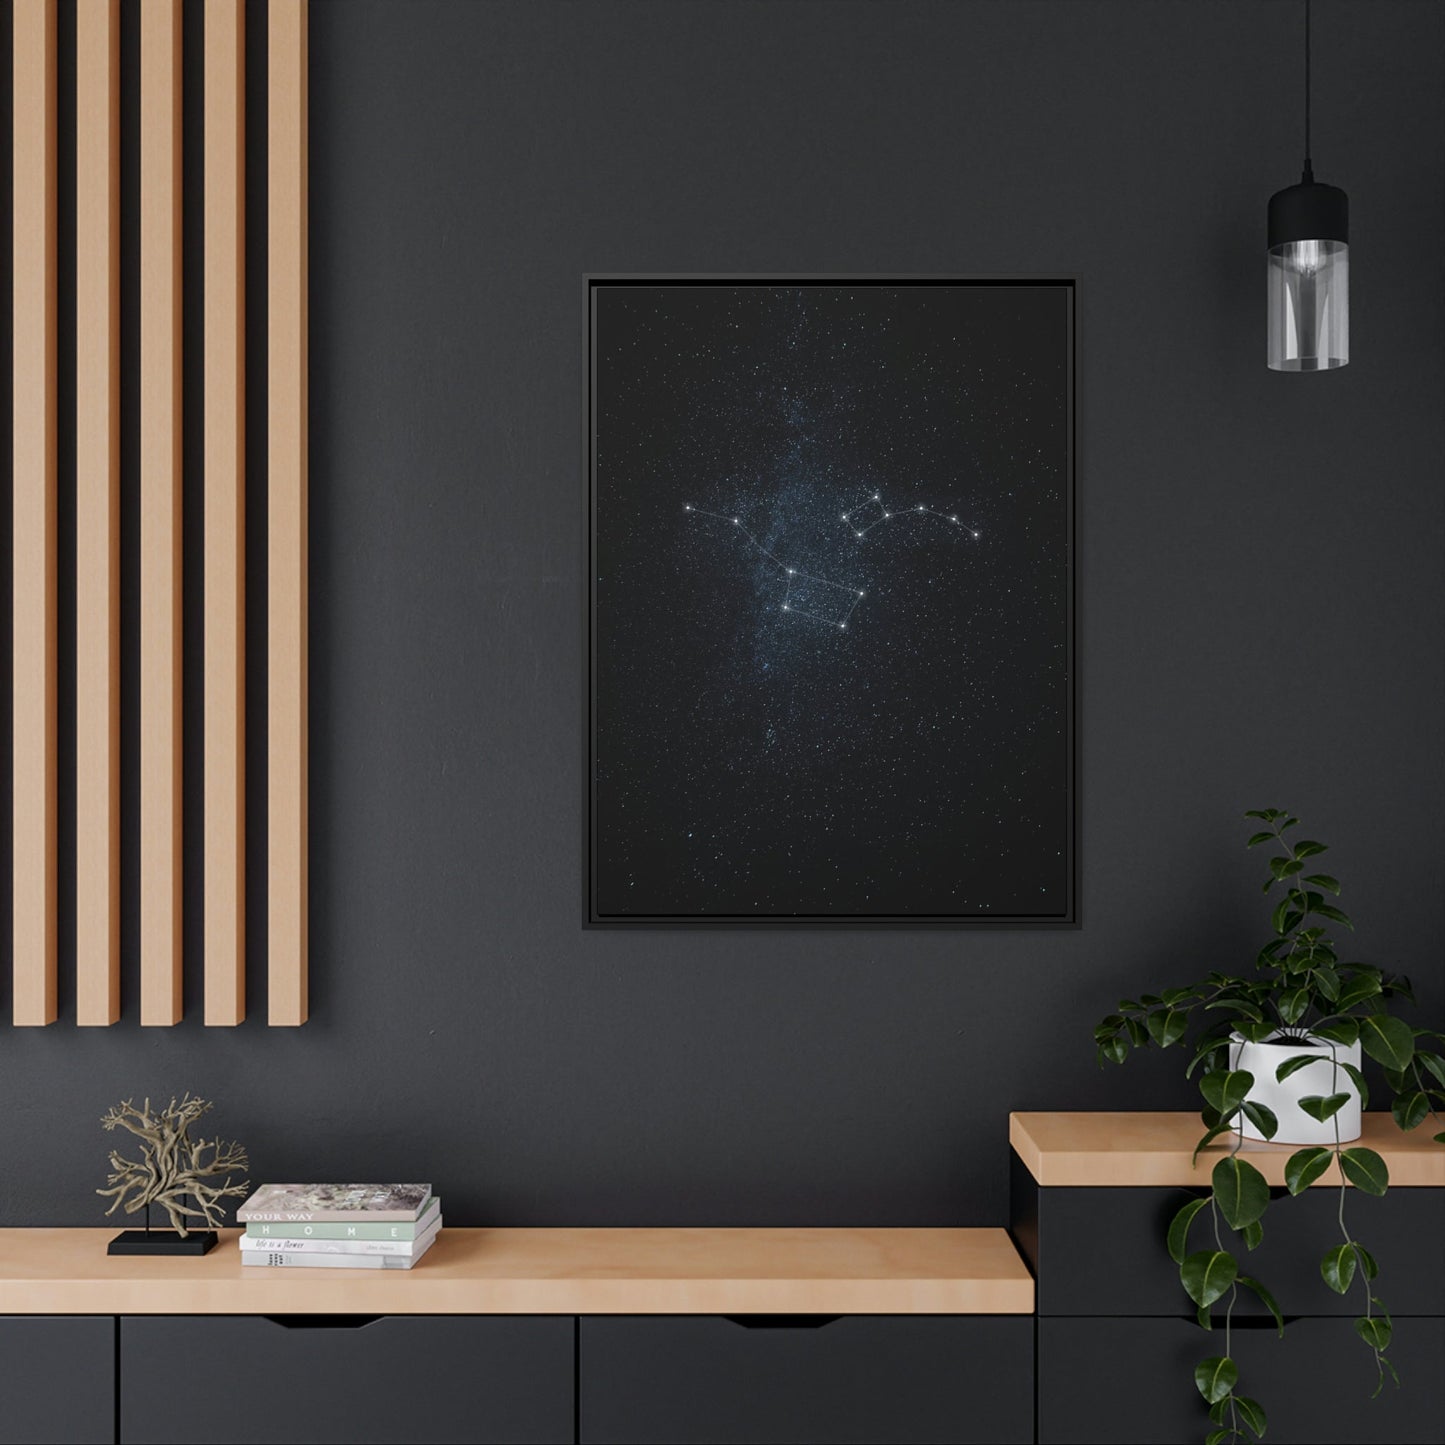 Cosmic Beauty: A Framed Canvas & Poster of Starry Constellations